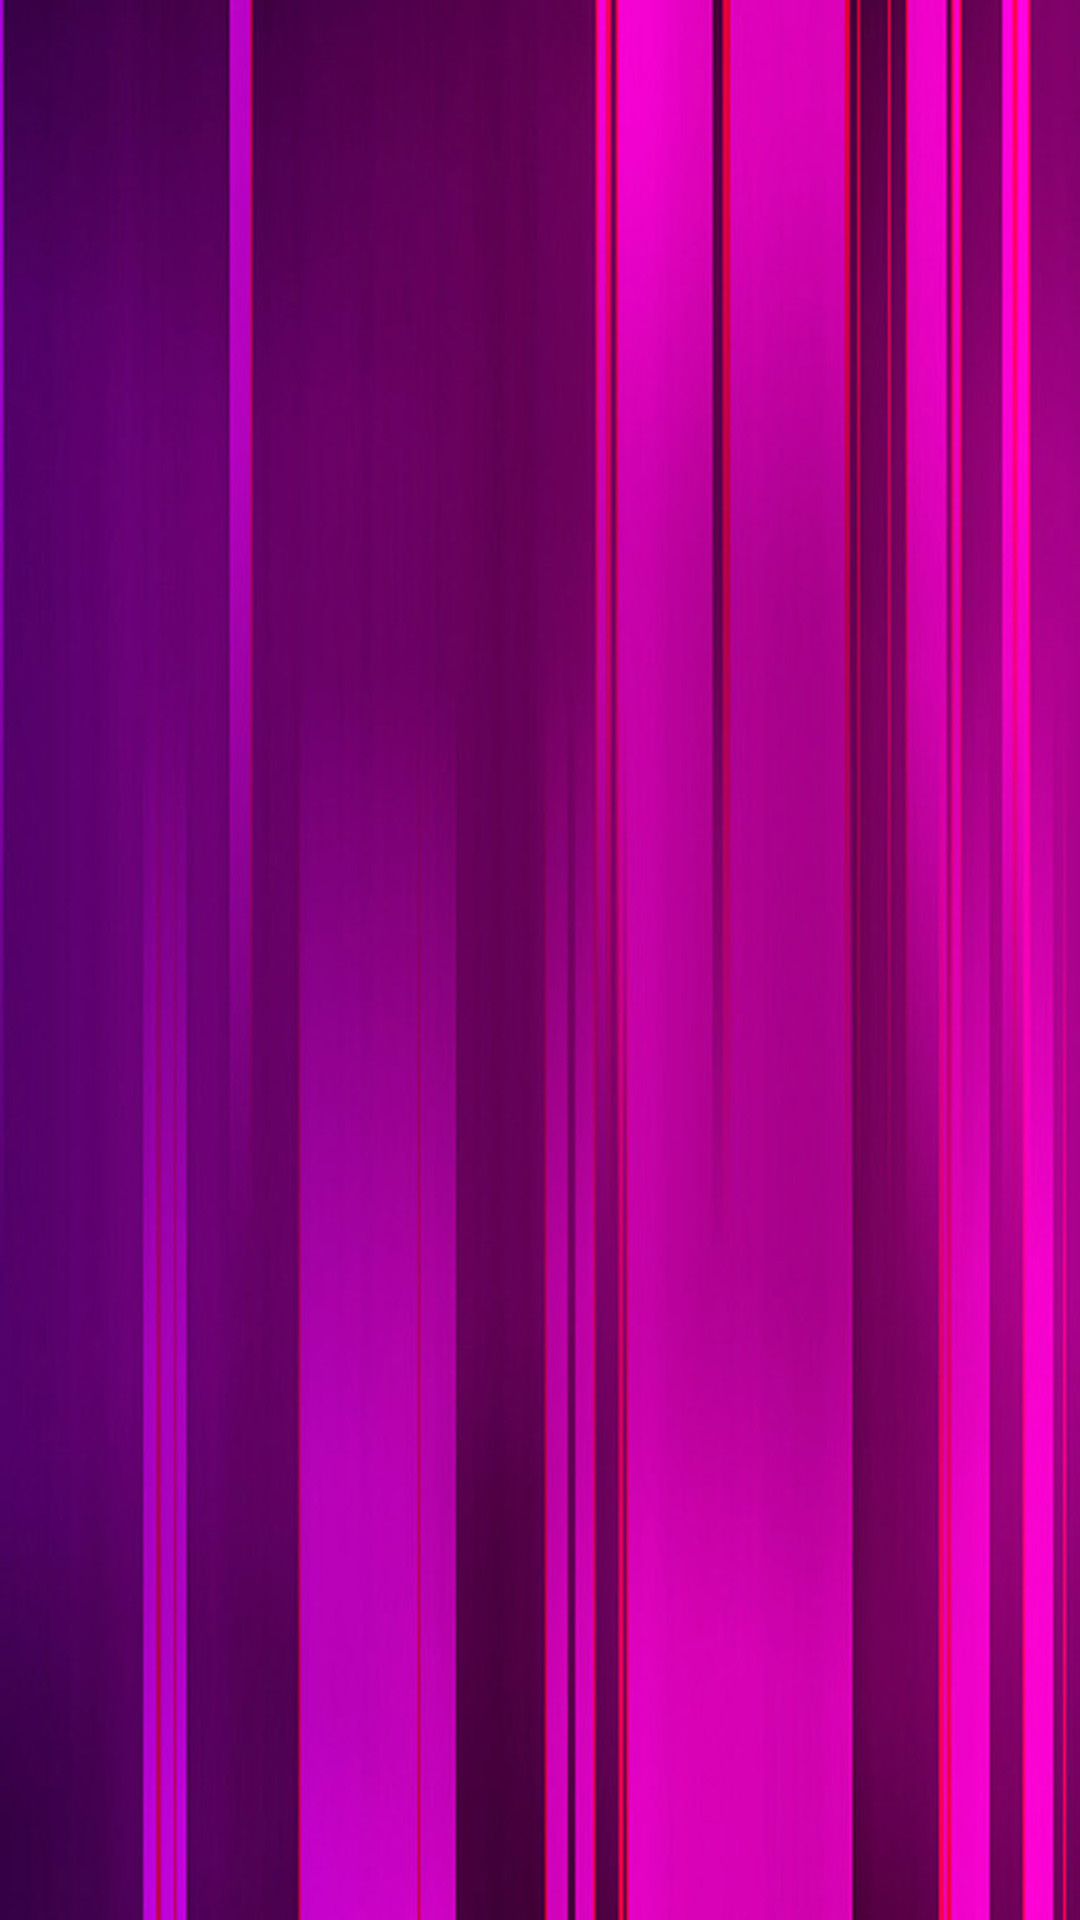 Dark pink background iPhone 6 Wallpaper and iPhone 6 Plus Wallpapers